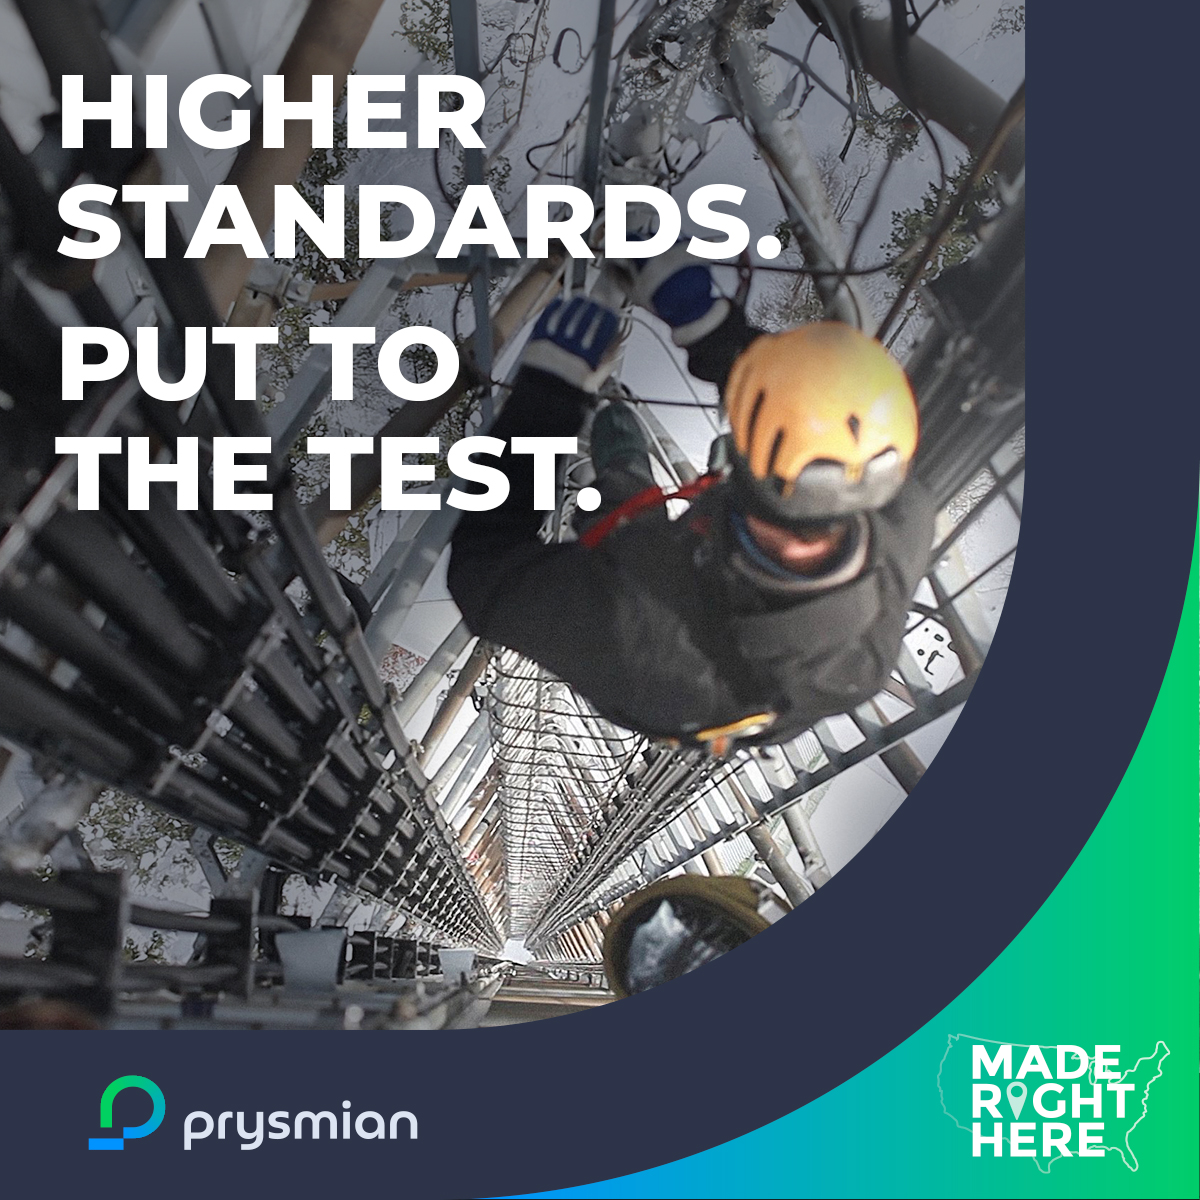 When you hold the highest level of certifications in the industry, you let the world know. #PrysmianFiber meets or exceeds quality and environmental standards in TL9000, ISO 9001, ISO 17025, ISO 14001. Ready to raise the bar on your next project? Partner with Prysmian for…